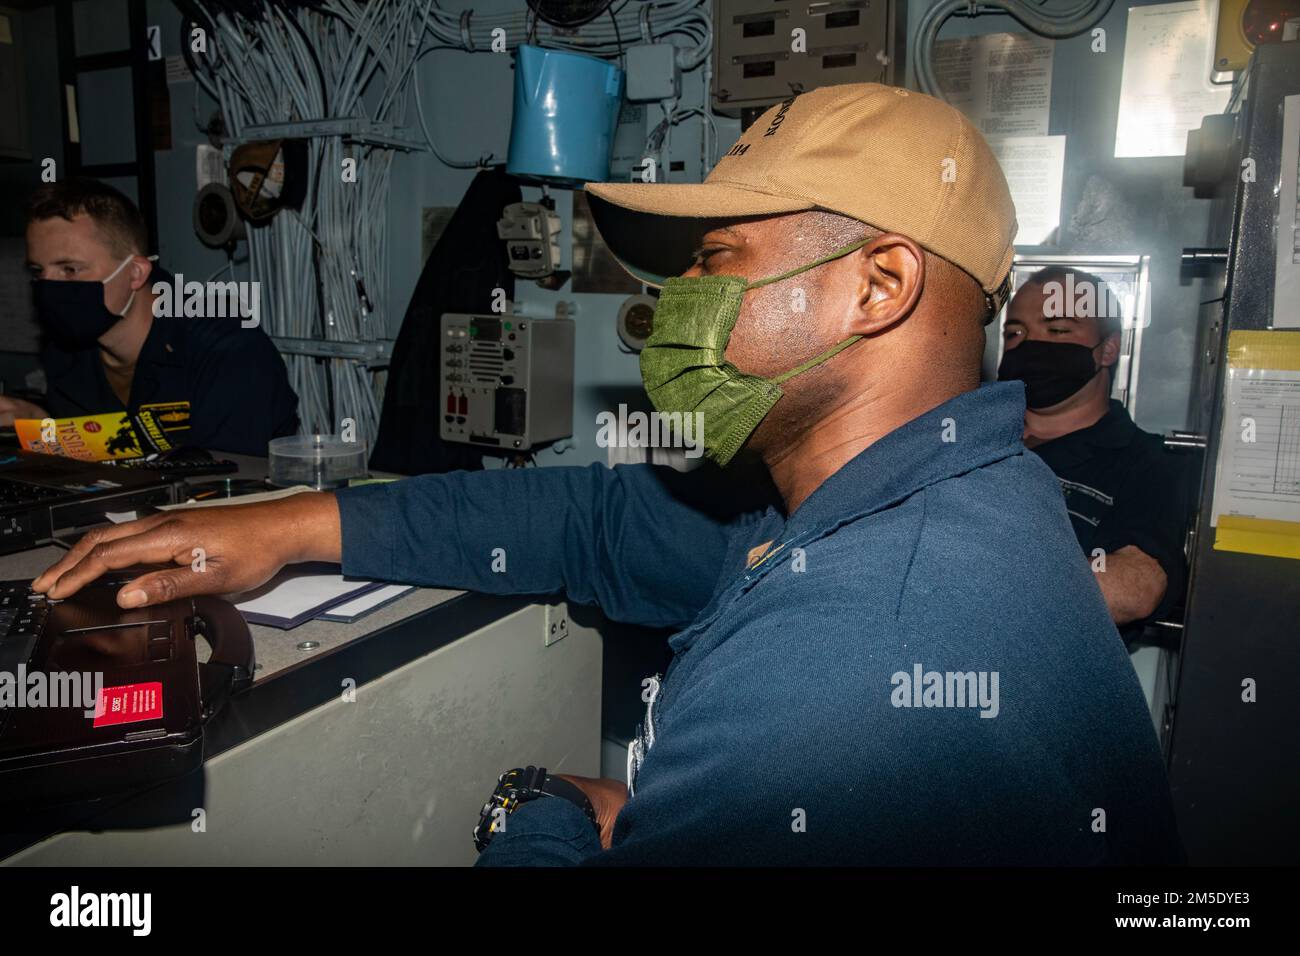 PHILIPPINE SEA (March 5, 2022) Sailors work on the captain’s night orders aboard Arleigh Burke-class guided-missile destroyer USS Ralph Johnson (DDG 114). Ralph Johnson is assigned to Task Force 71/Destroyer Squadron (DESRON) 15, the Navy’s largest forward-deployed DESRON and the U.S. 7th fleet’s principal surface force. Stock Photo